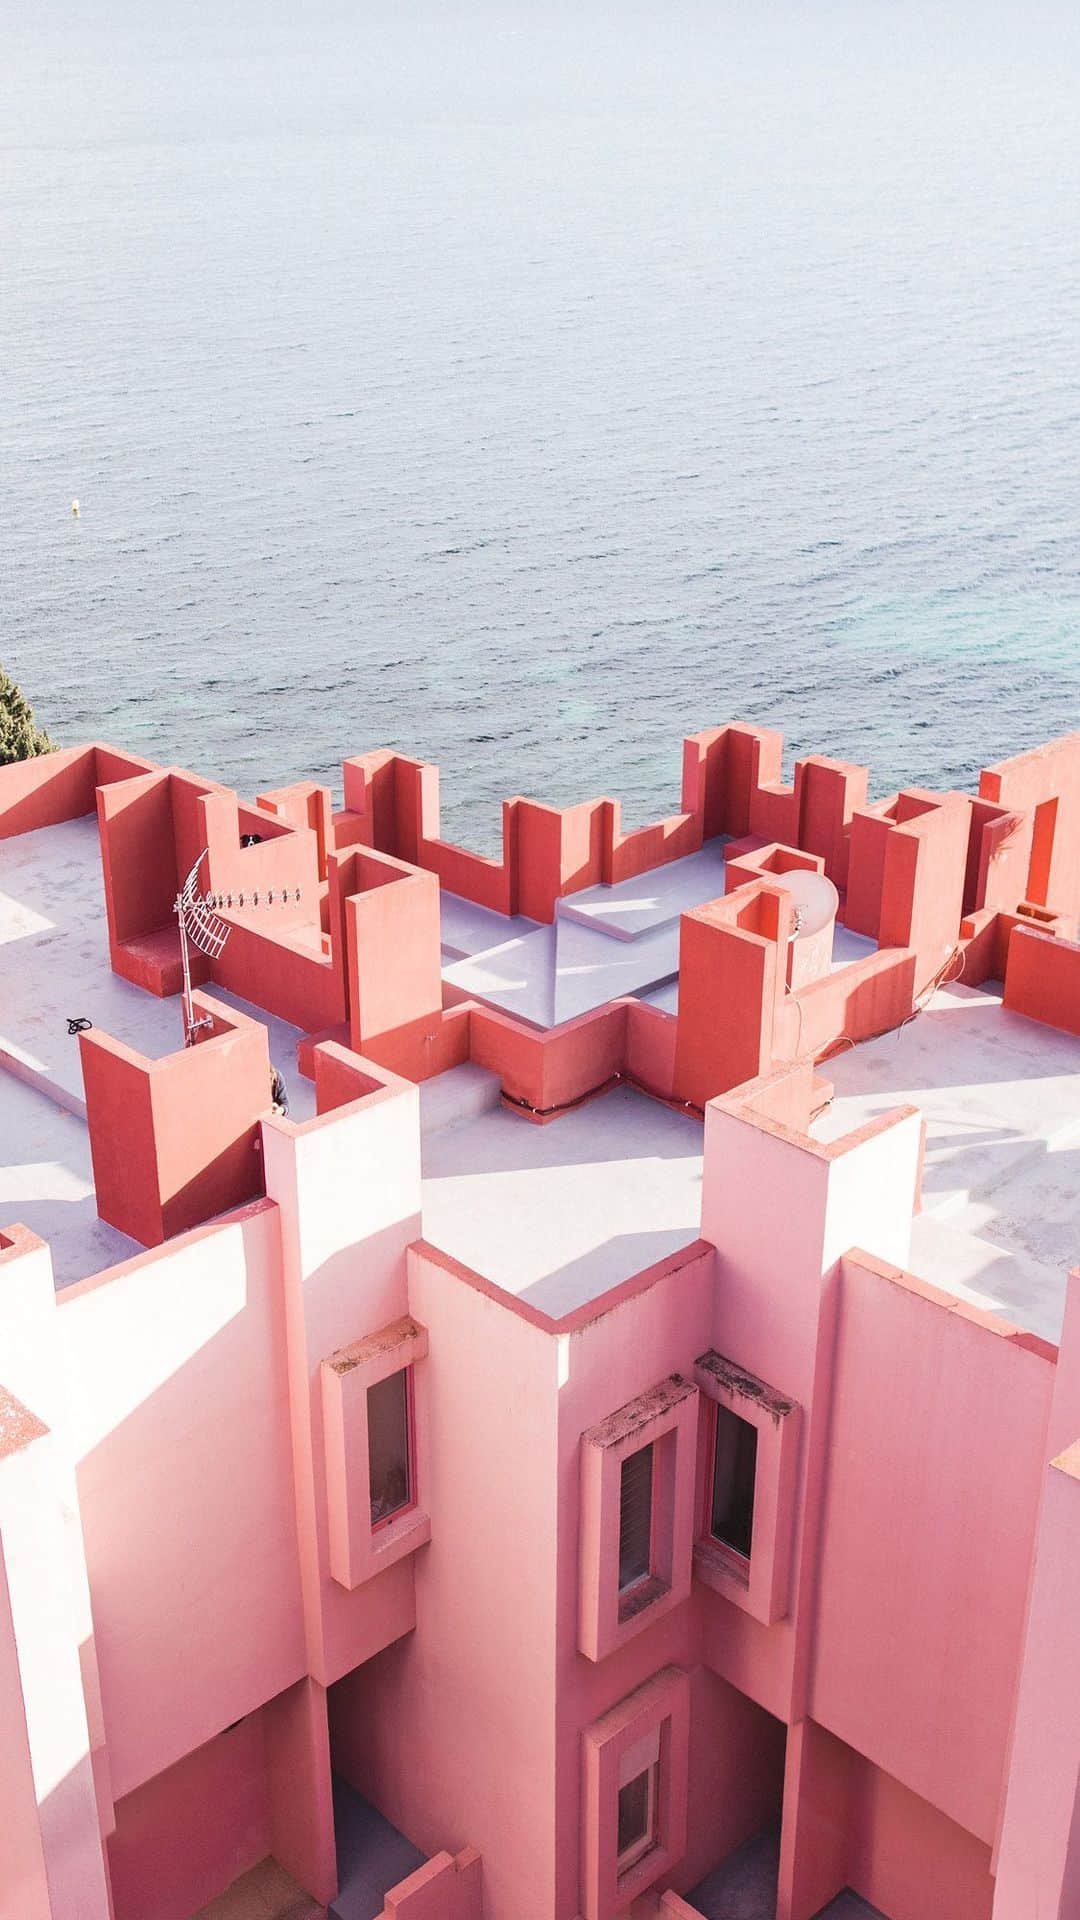 Andrew Knappのインスタグラム：「This was meant to be a reminder that my print of Muralla Roja is available until Friday only. And then I remembered that today would have been Momo’s birthday. And then this became fitting because it was definitely on the list of favourite places I explored with him.   My friend @helananas told me about Muralla Roja, a real life M.C. Escher drawing in Spain by architect Ricardo Bofill, which sounded impossible. A place I’d likely never see in my life, so I forgot about it. A few years later, I found myself exploring this building in complete awe with Momo by my side. It still feels like we visited another planet.」